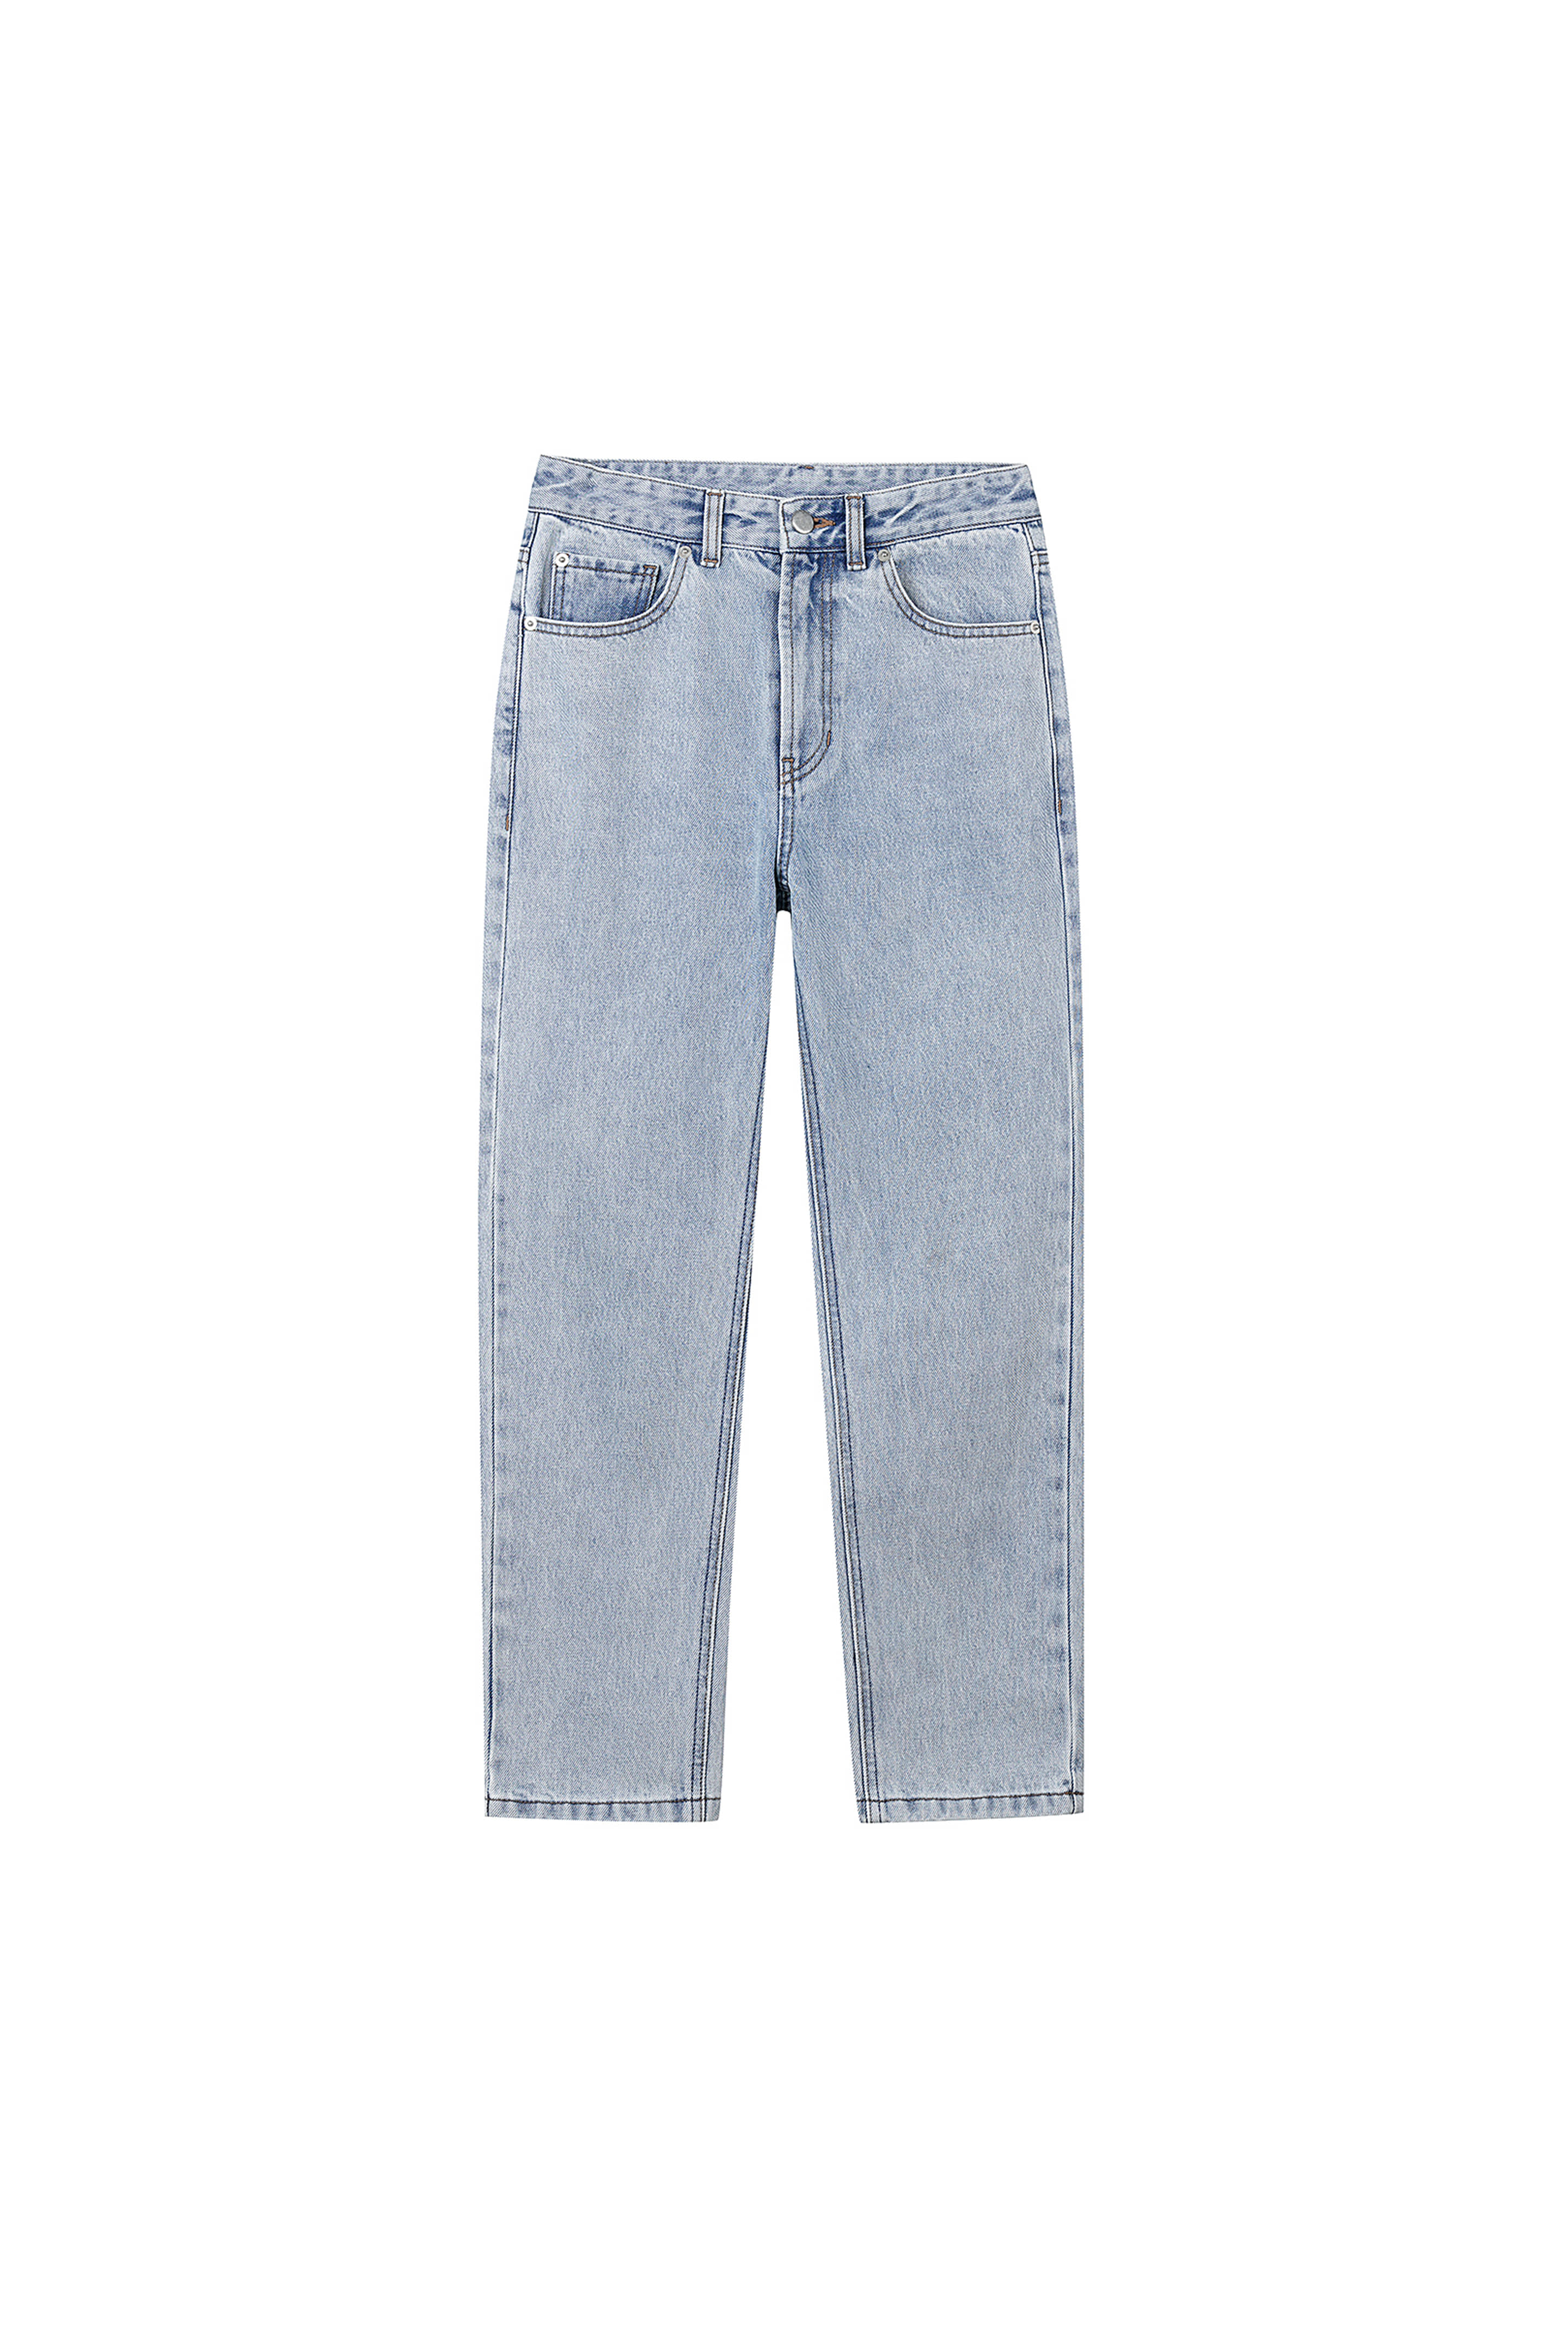 Midrise Cropped Jeans Hand Brushed L.Blue